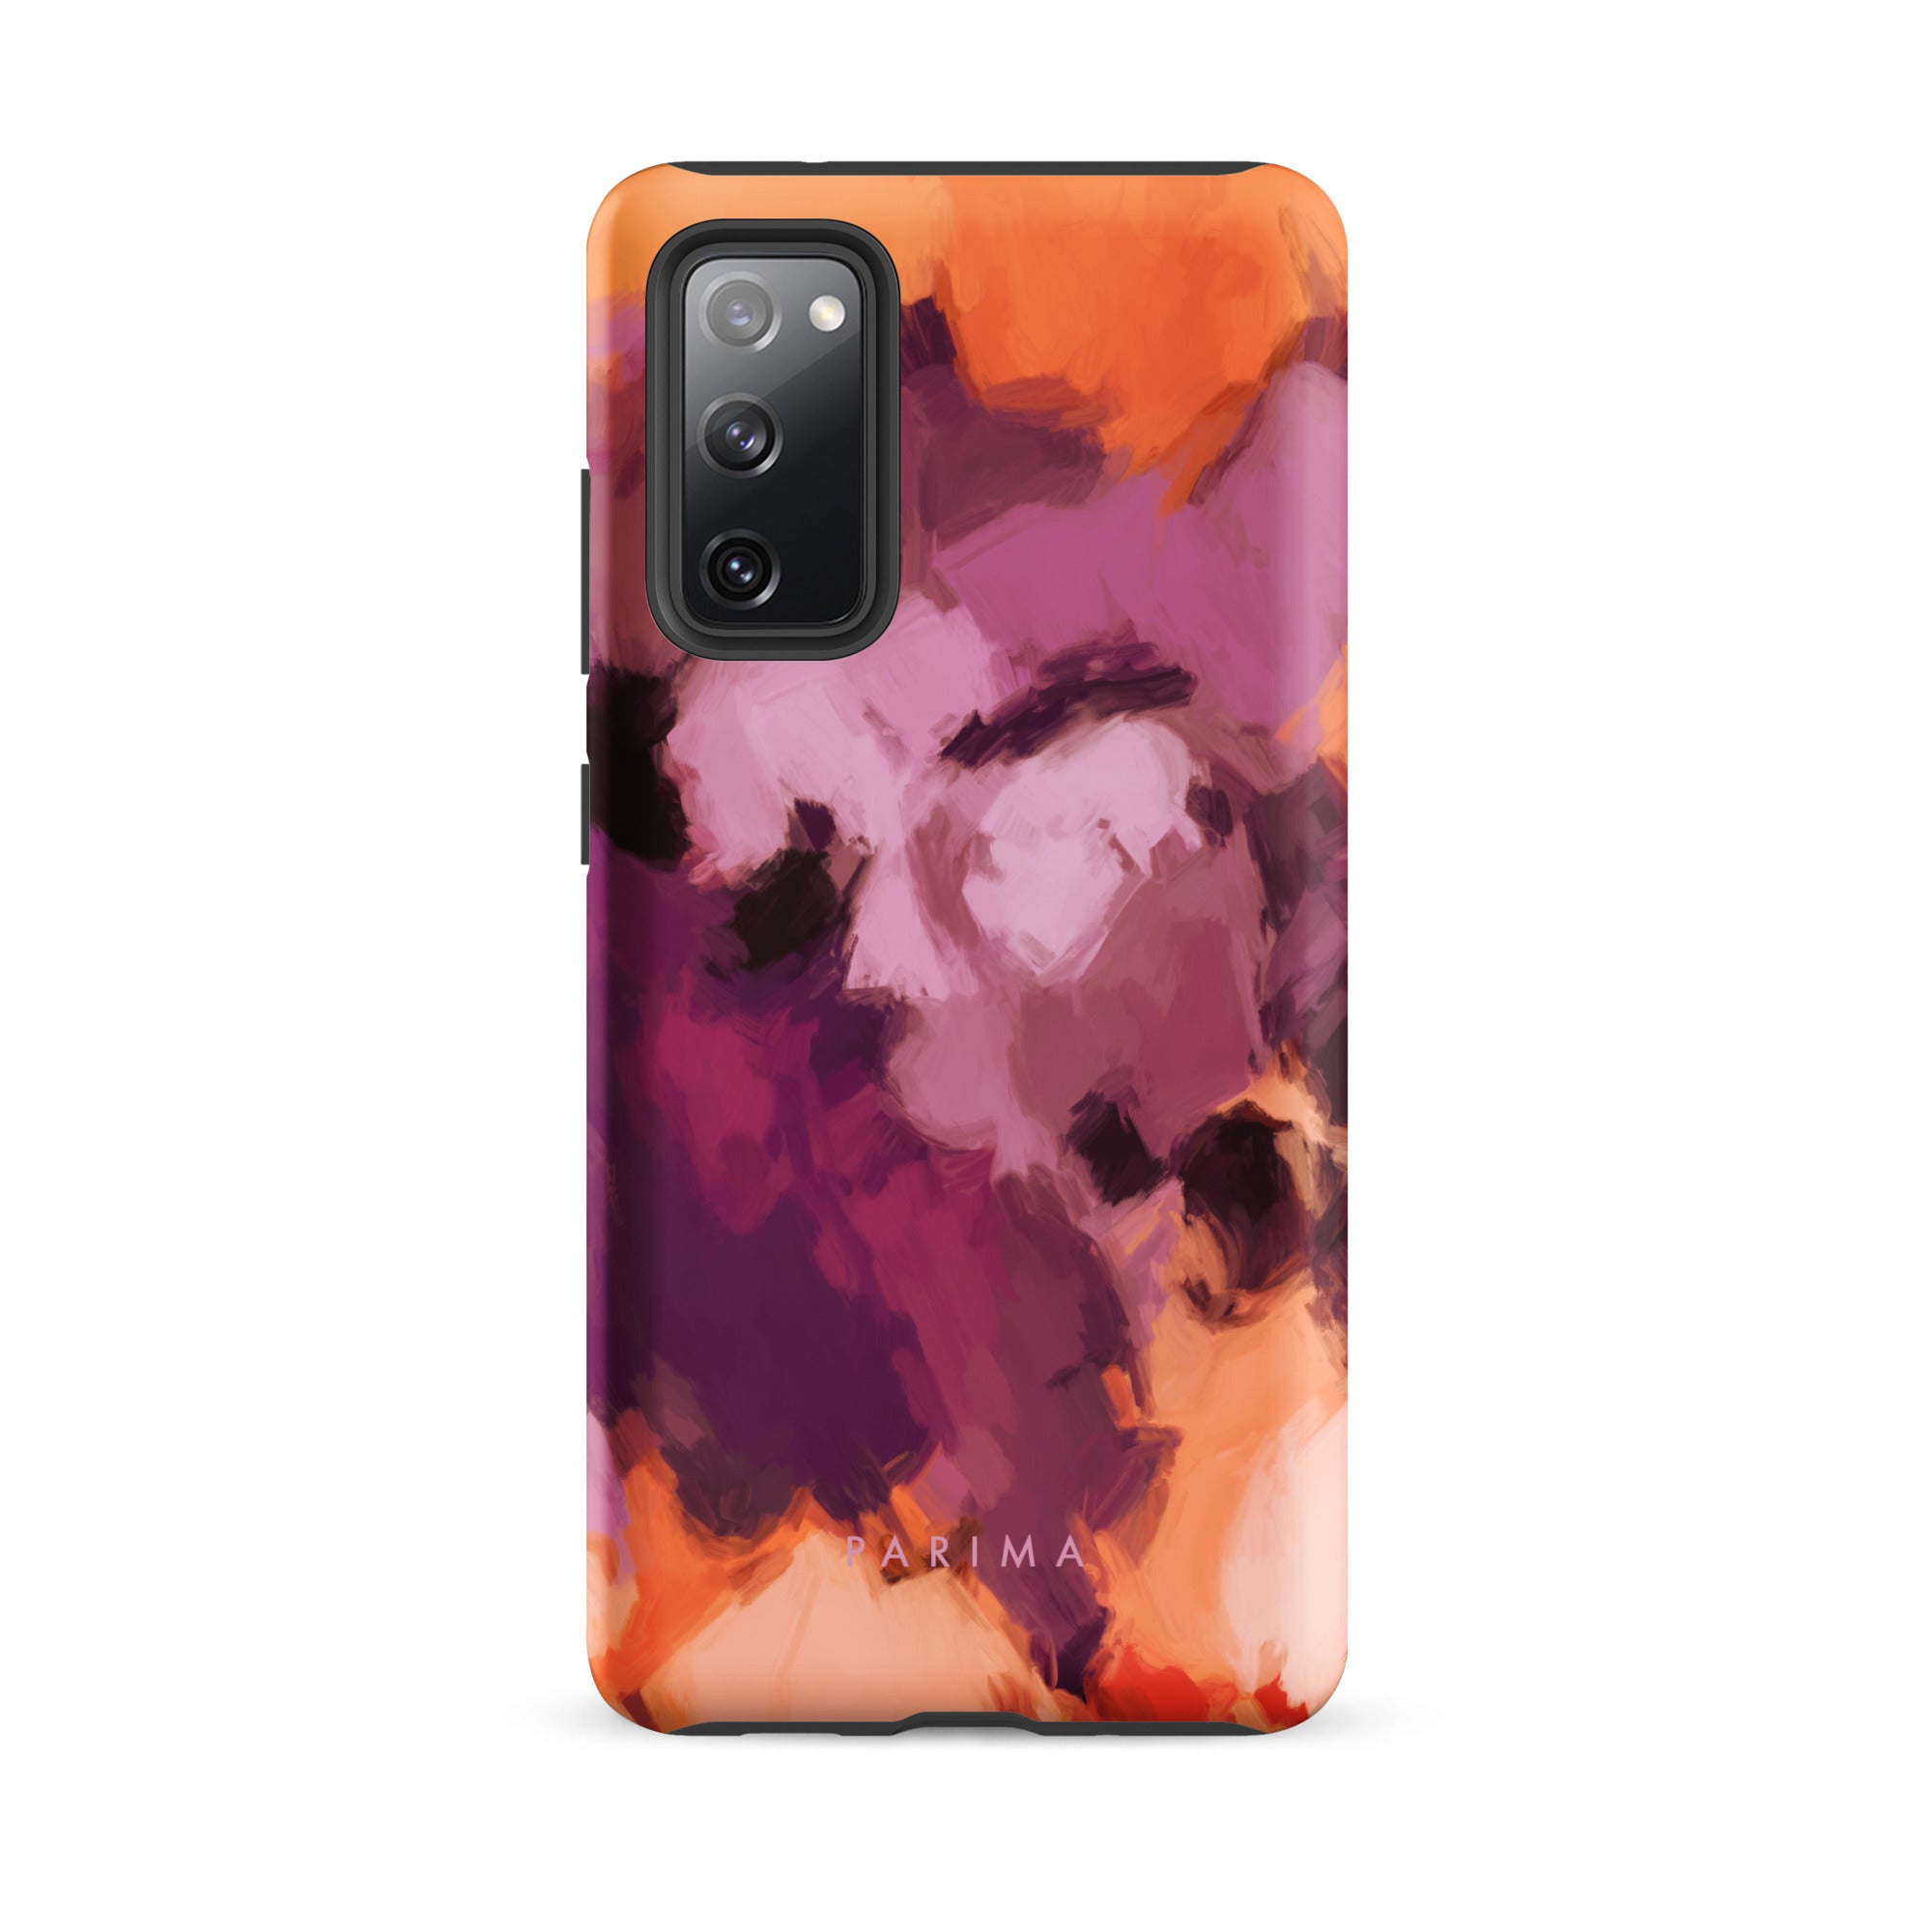 Lilac, purple and orange abstract art on Samsung Galaxy S20 FE tough case by Parima Studio